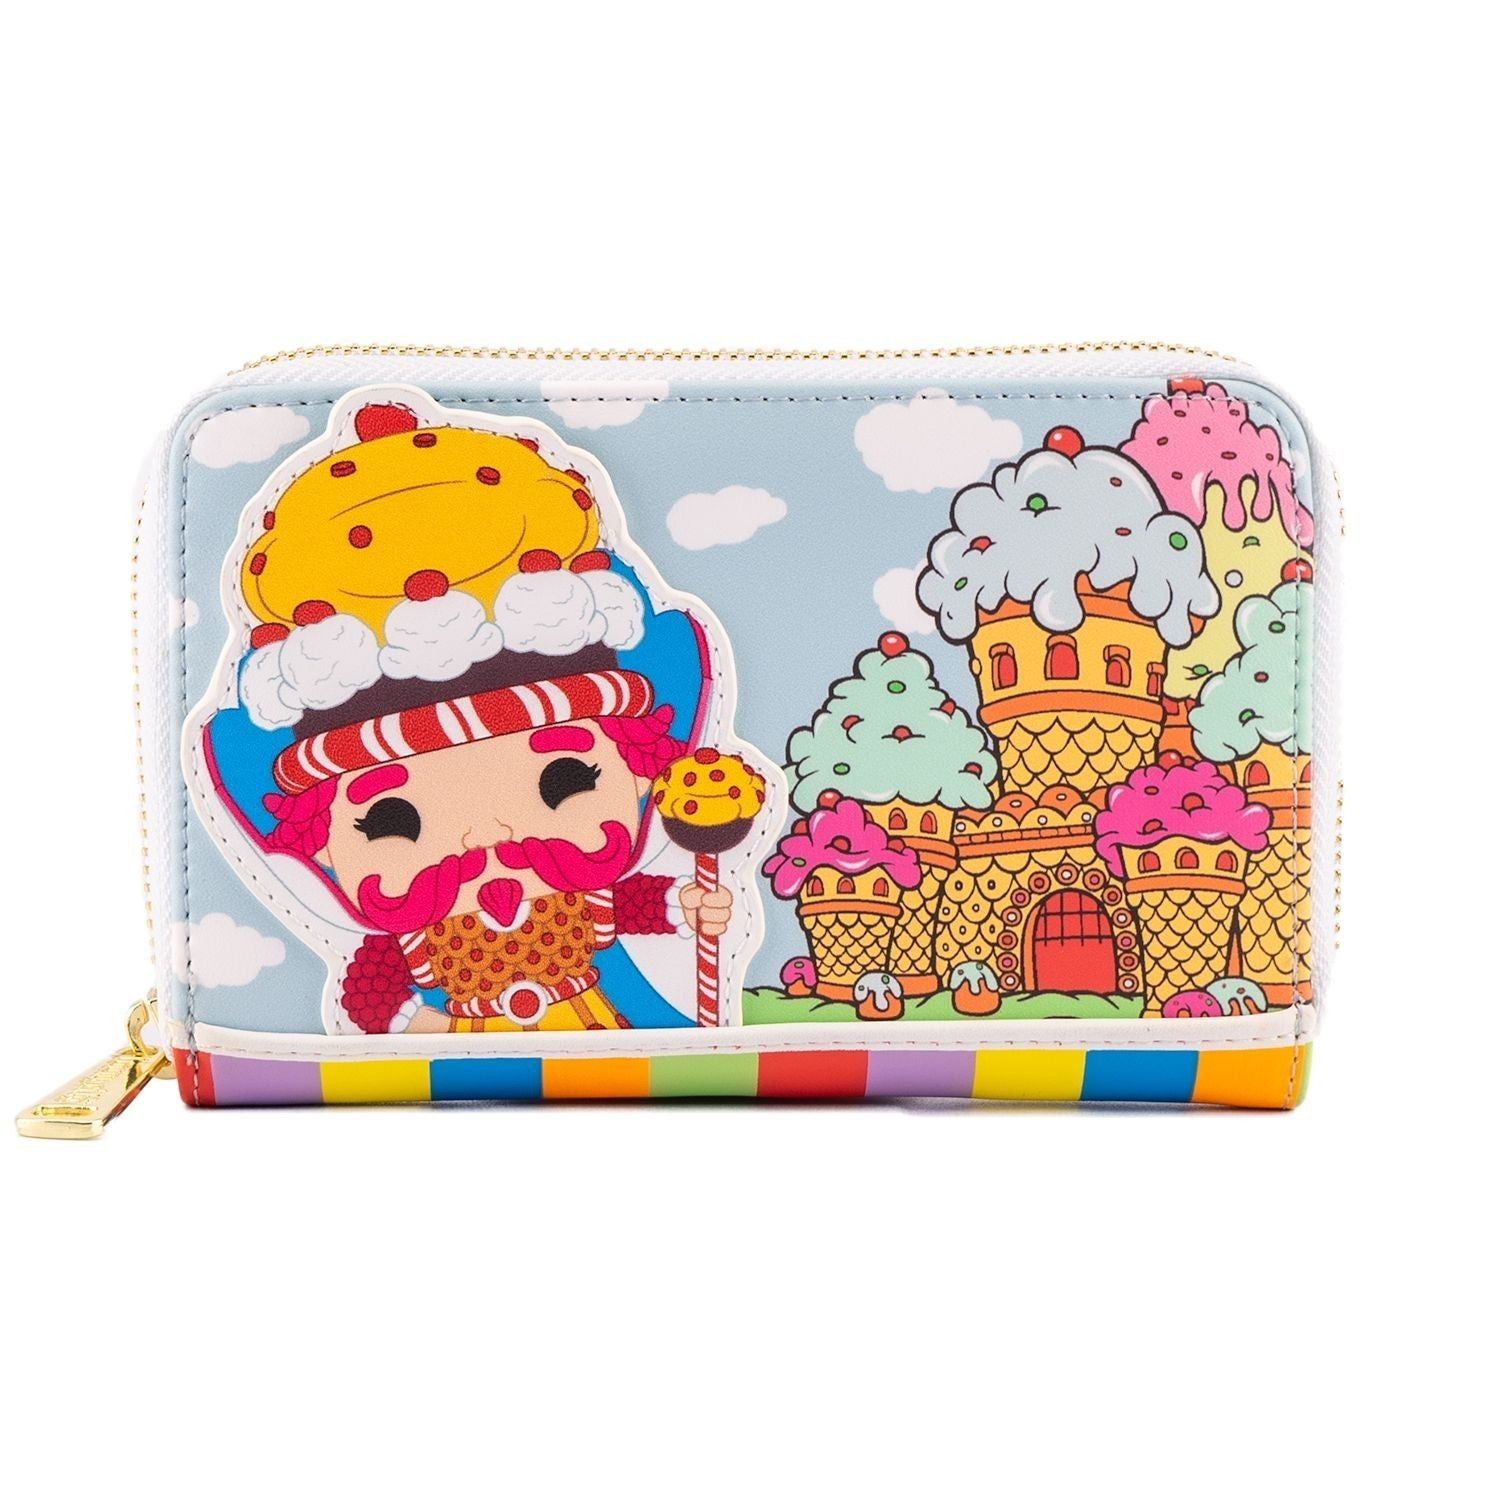 King Kandy's Candy Land Castle Mini Backpack